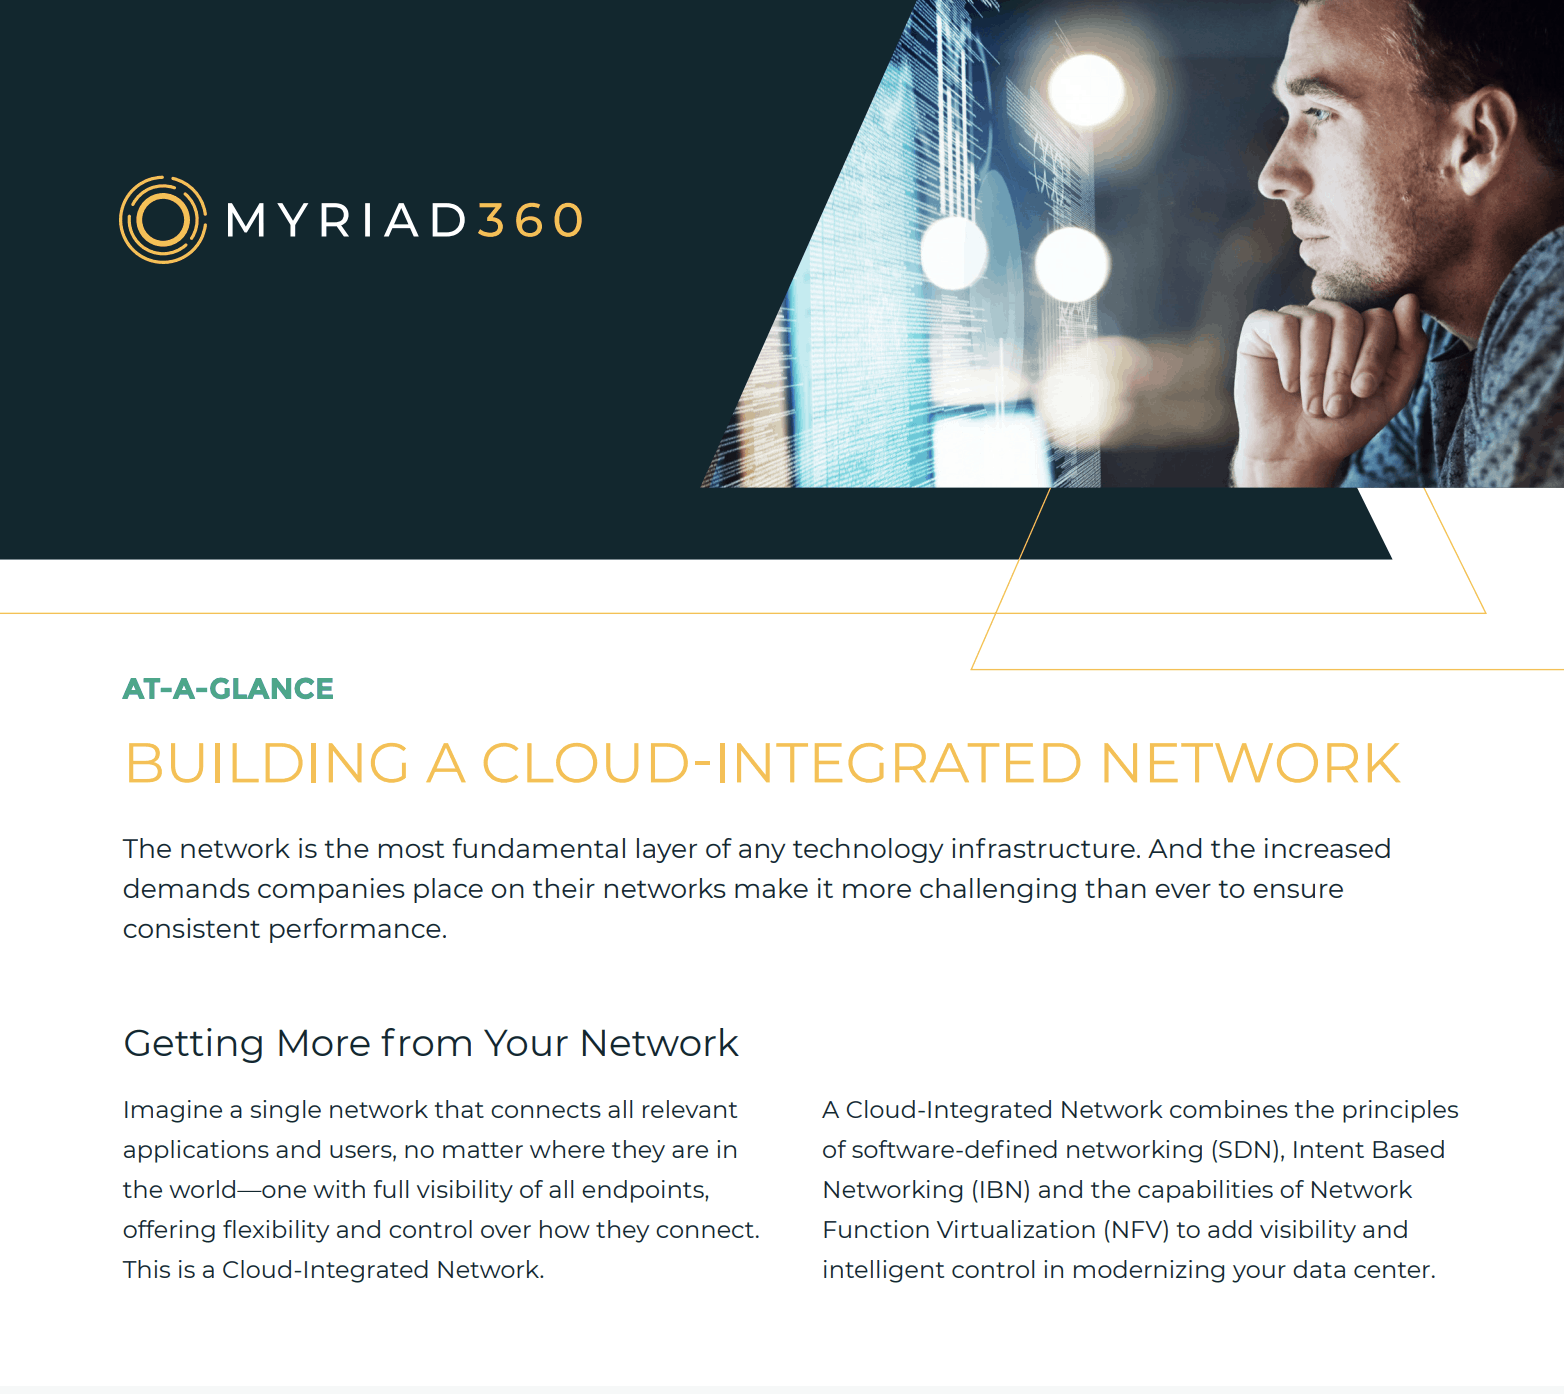 Cloud-Integrated Network